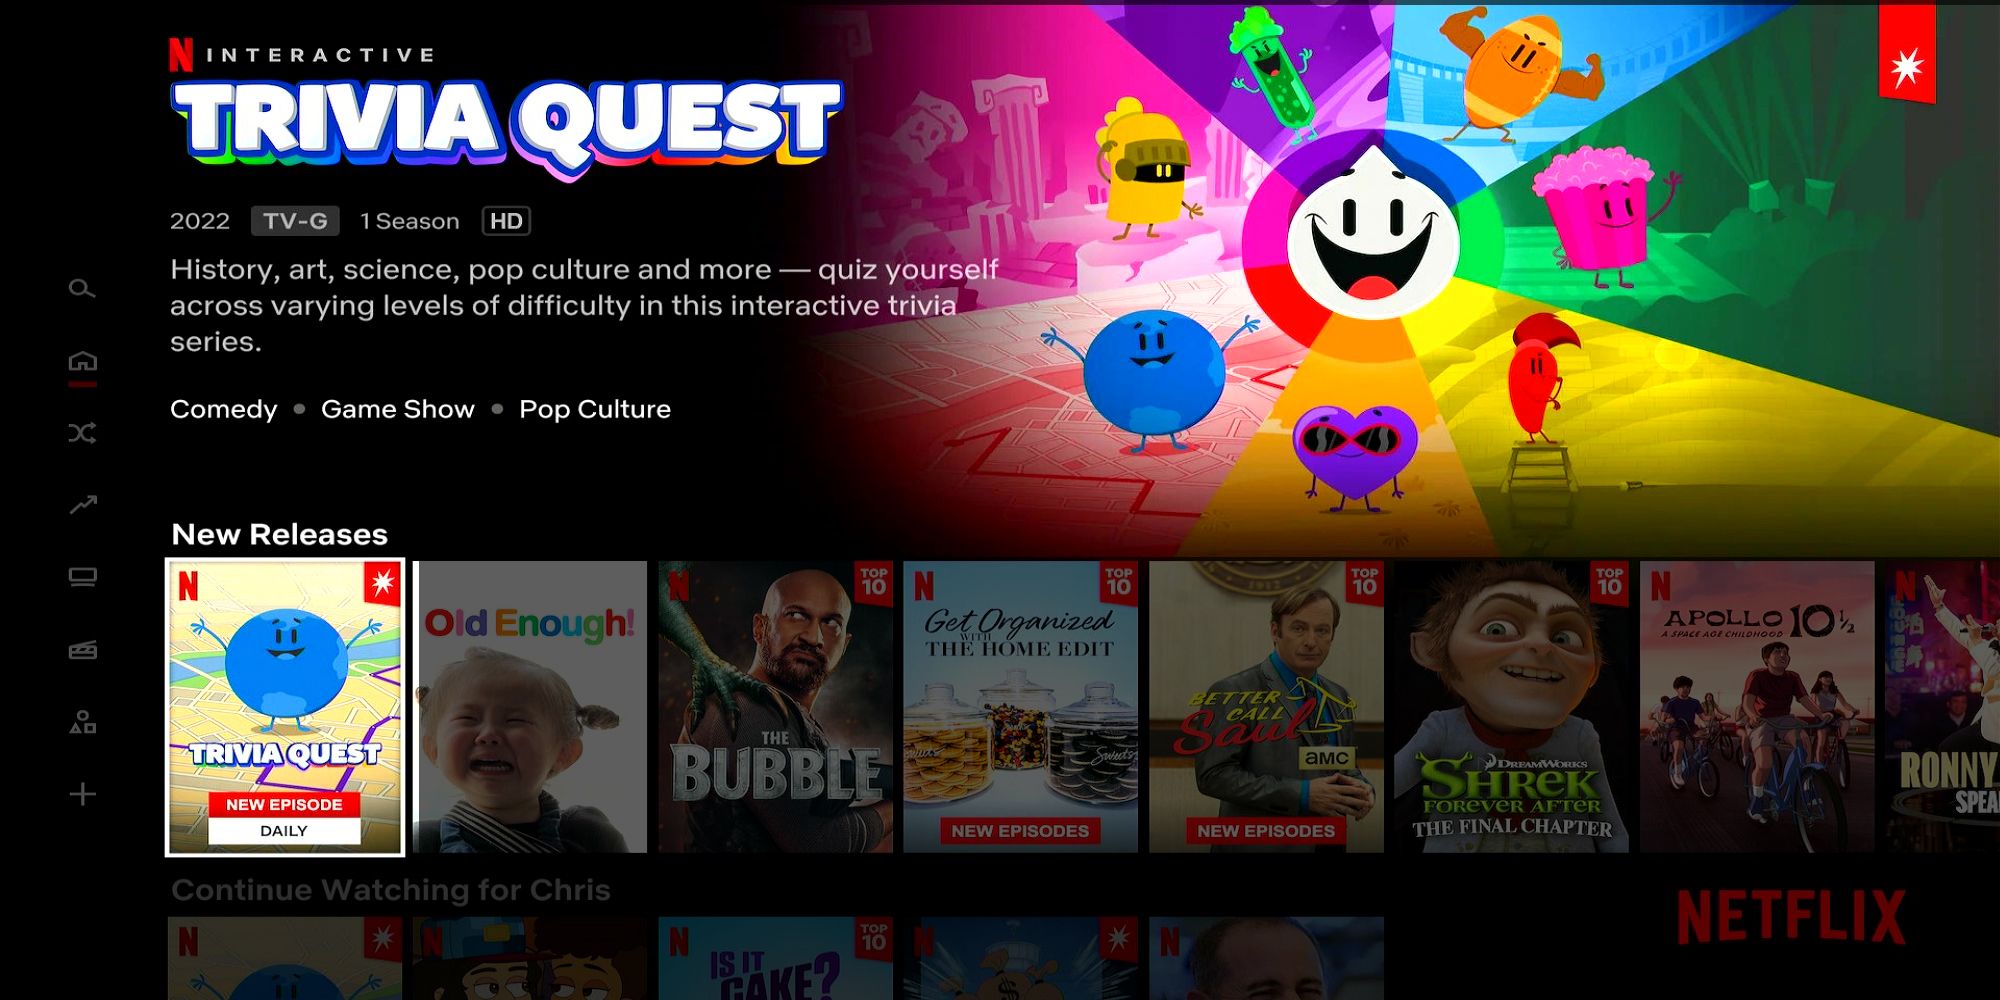 Trivia Quest, as displayed in the New Releases section of Netflix's catalog.